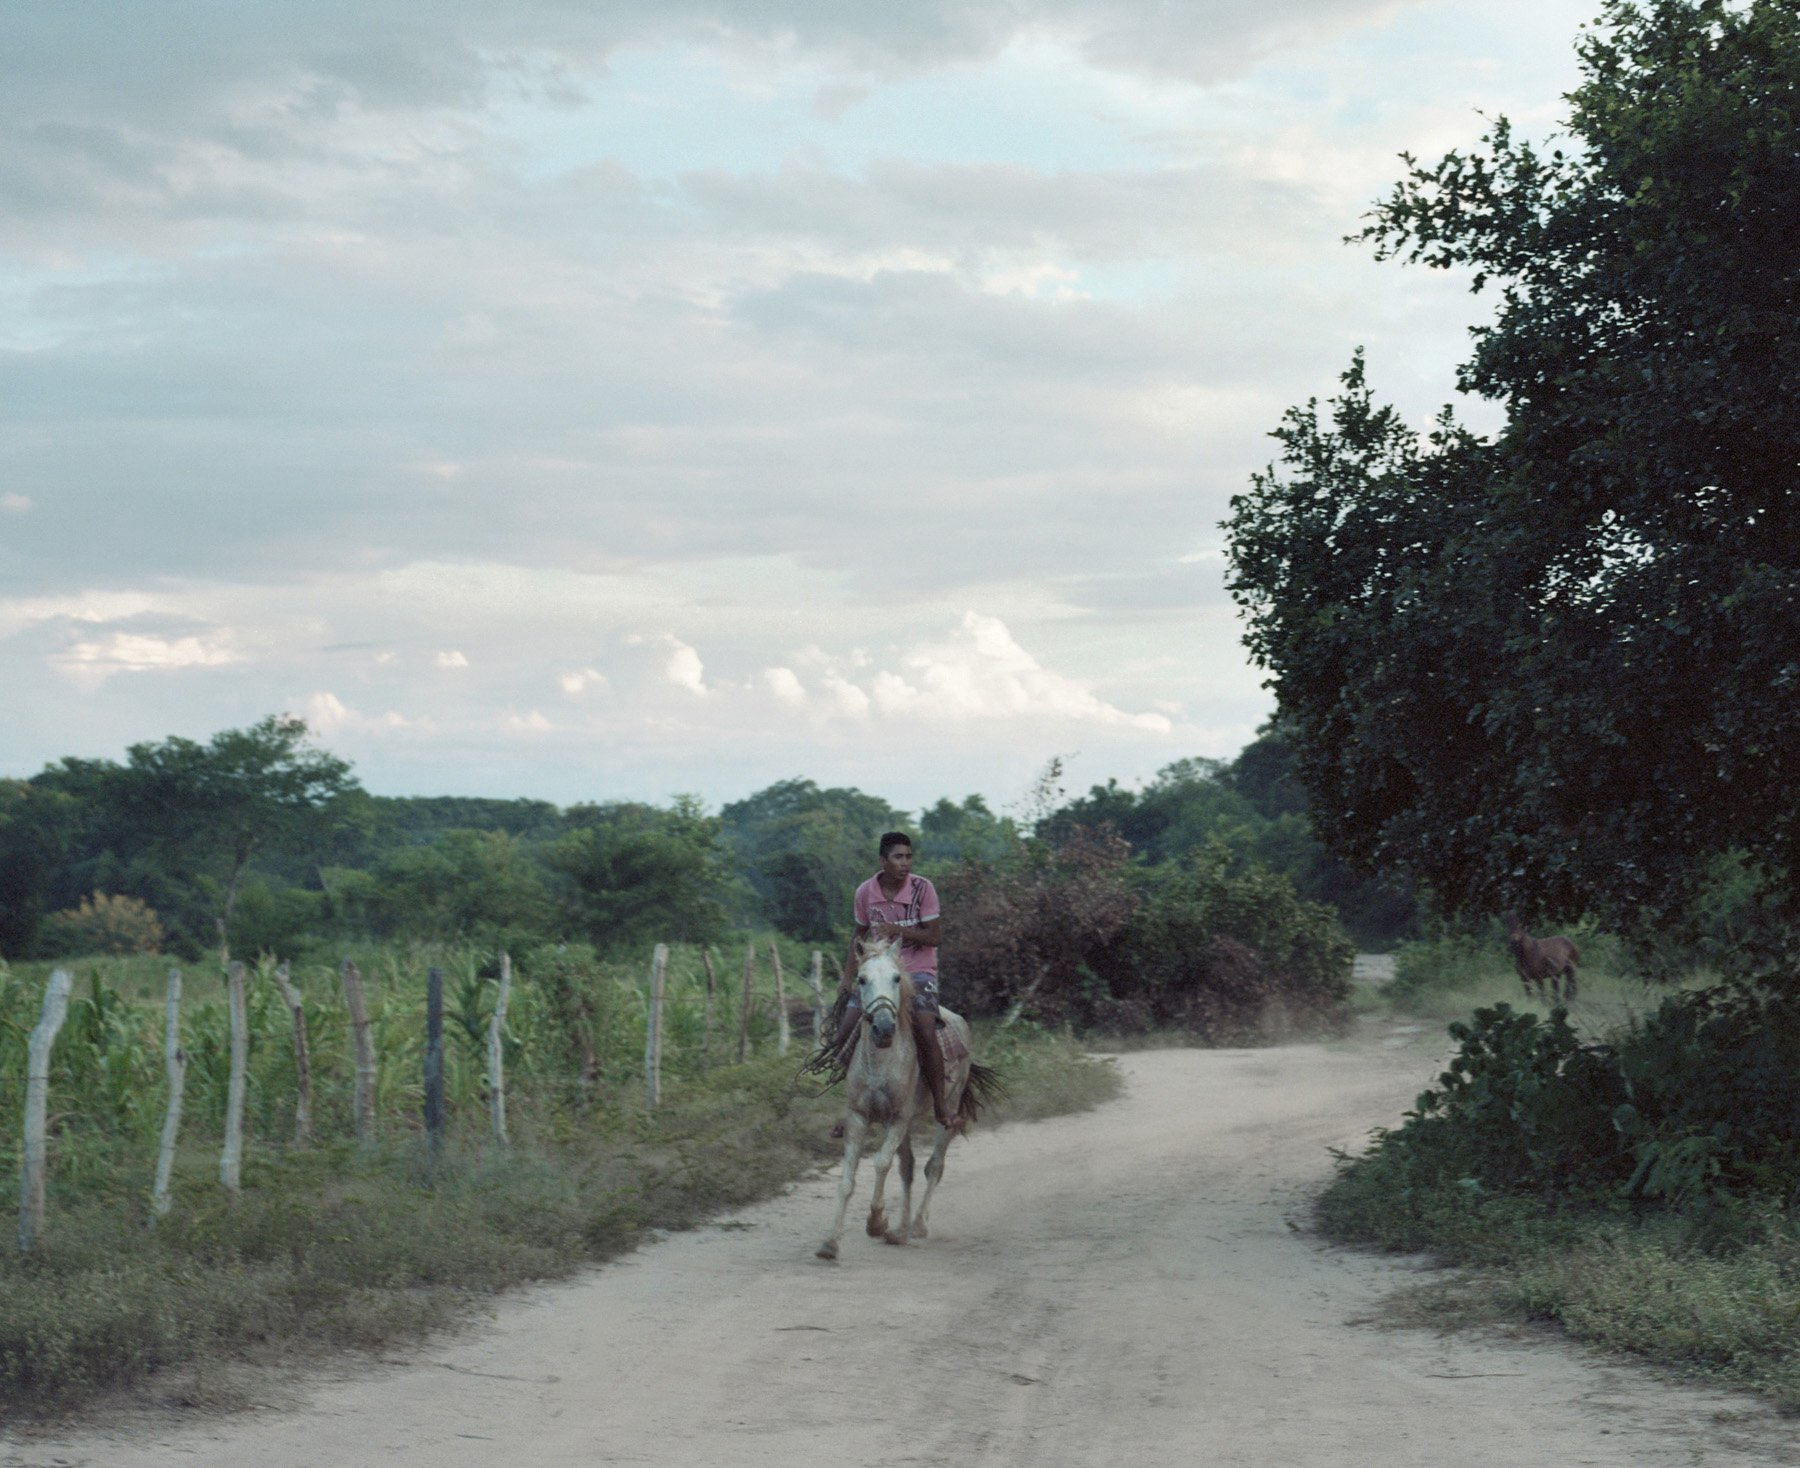  Januaria, Minas Gerais, Brazil 2019. A local boy of the Quilombo of Croatá rides on his horse. The Quilombo’s Community ask several timeto the city hall to take care of the roads but they didn’t carried on the works of maintenance. 